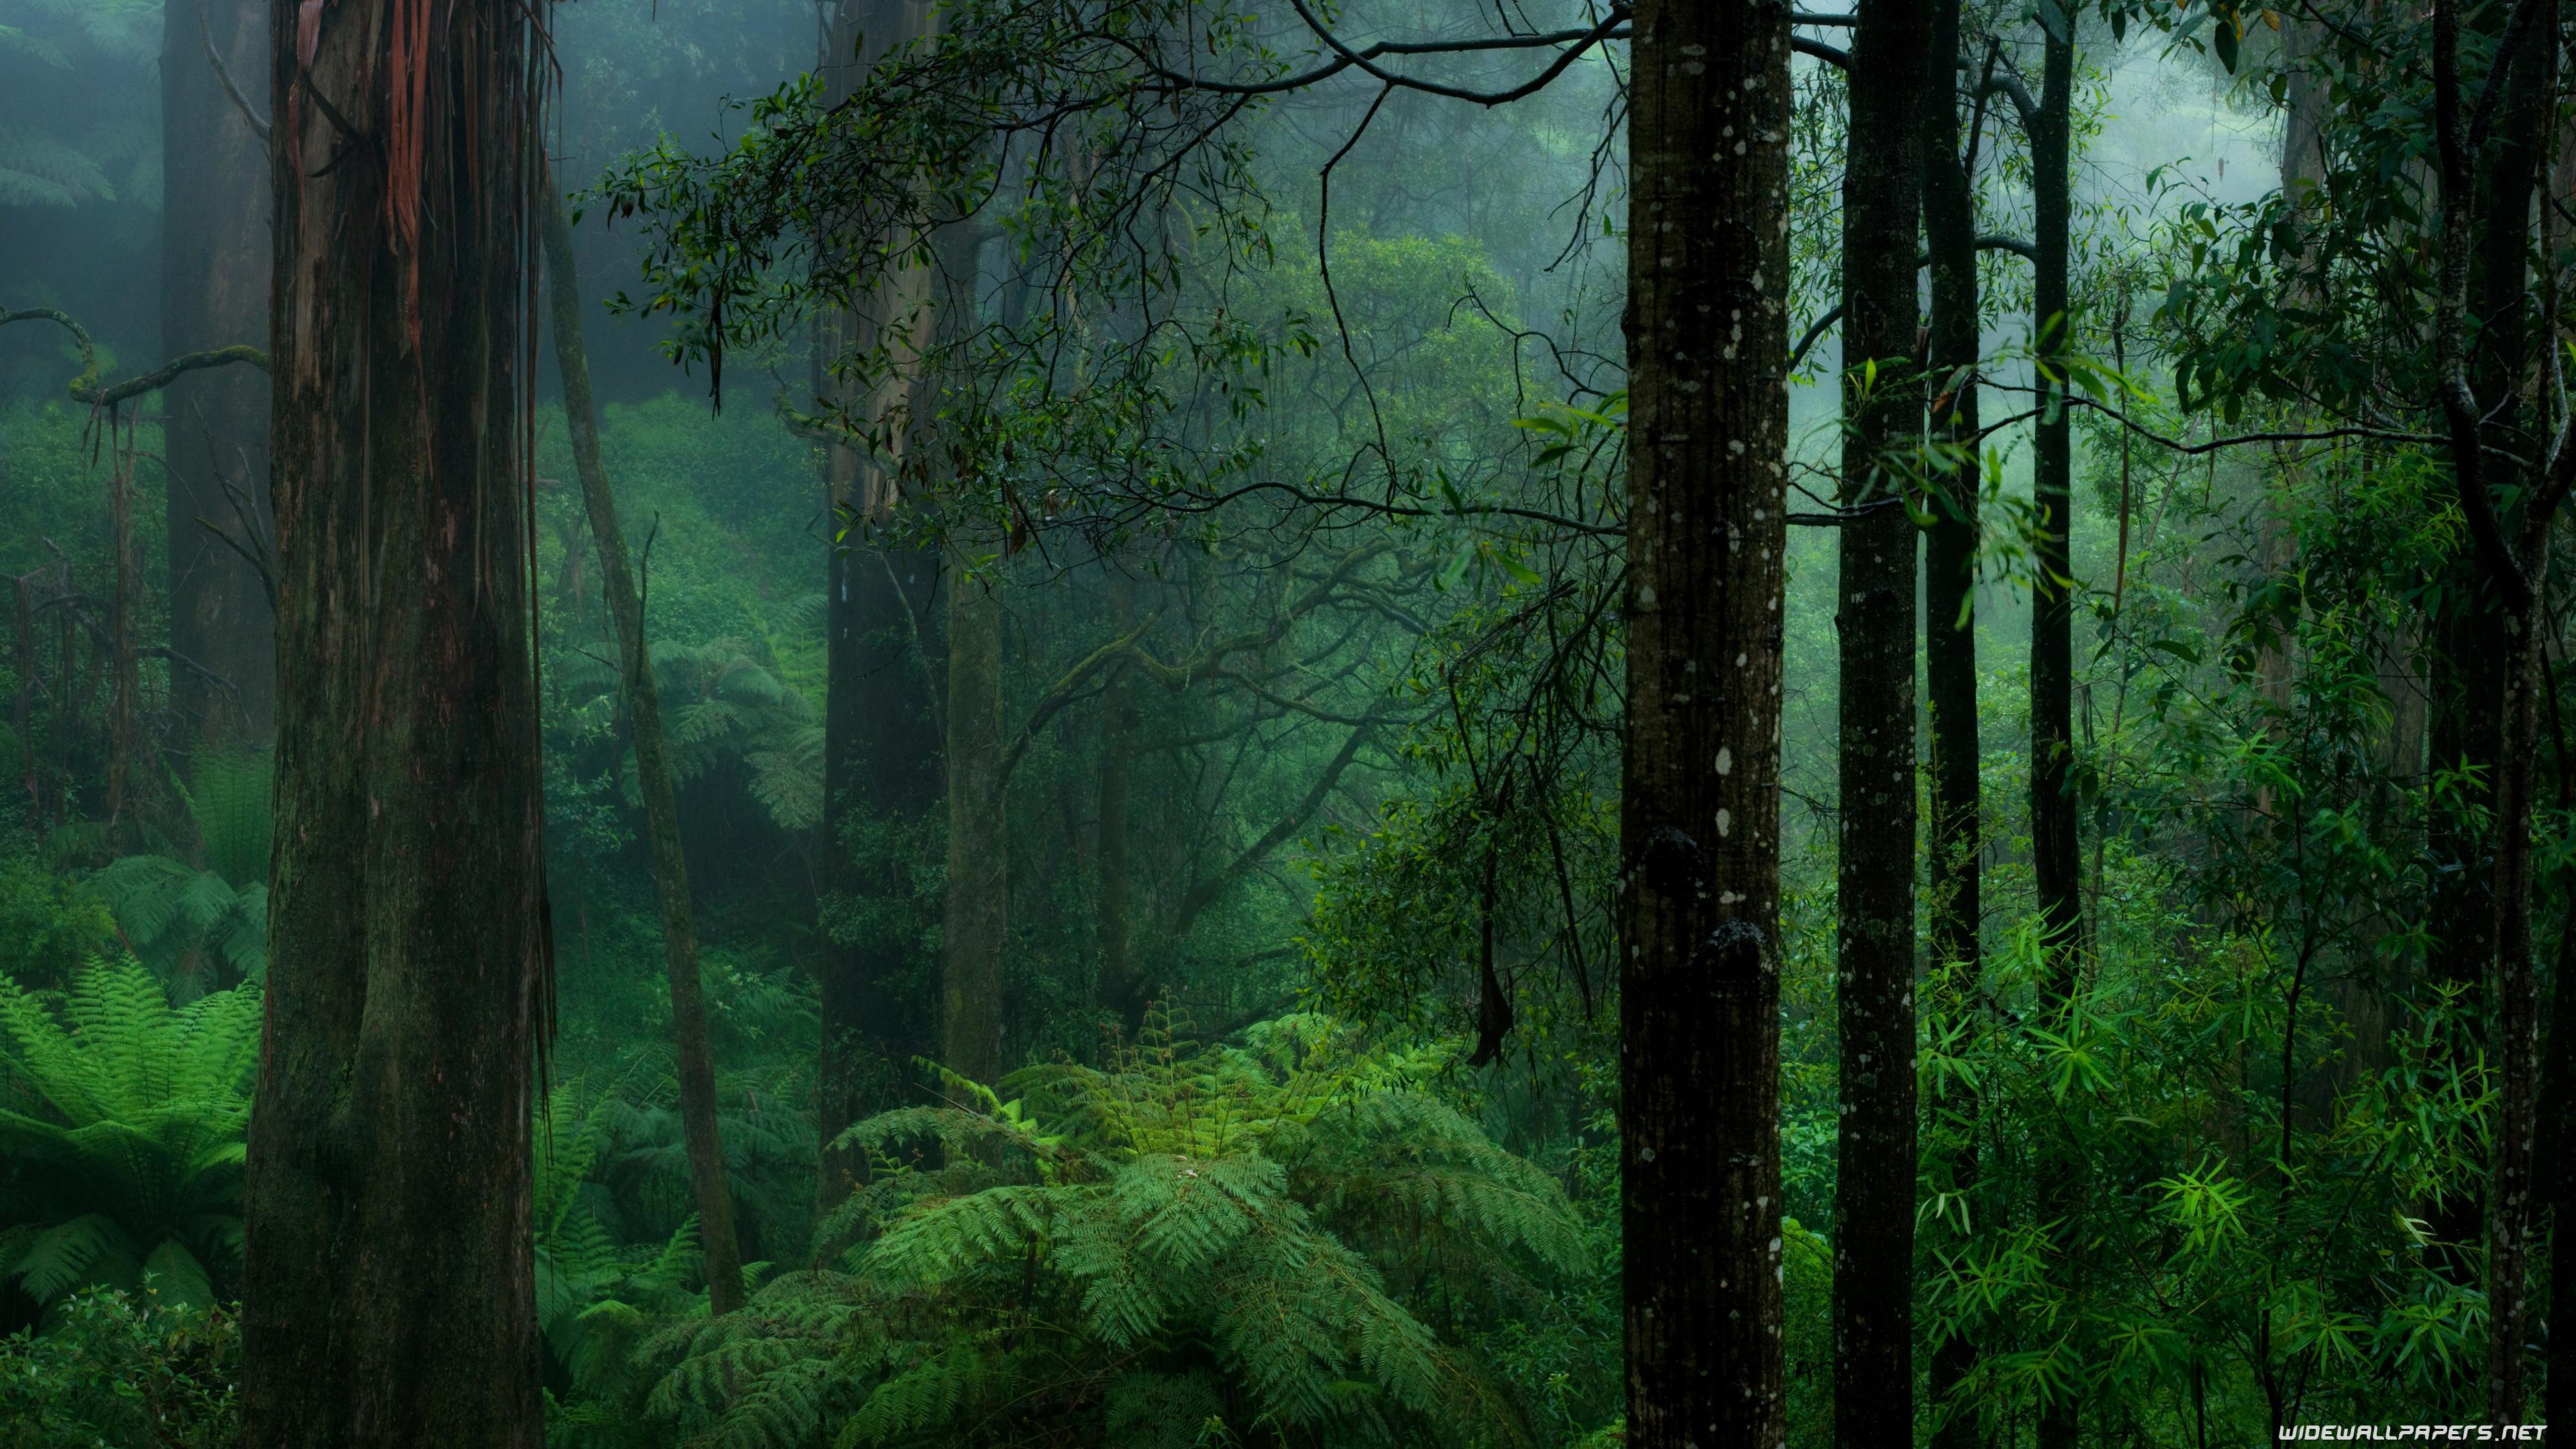 Rainy Forest Wallpapers - Top Free Rainy Forest Backgrounds